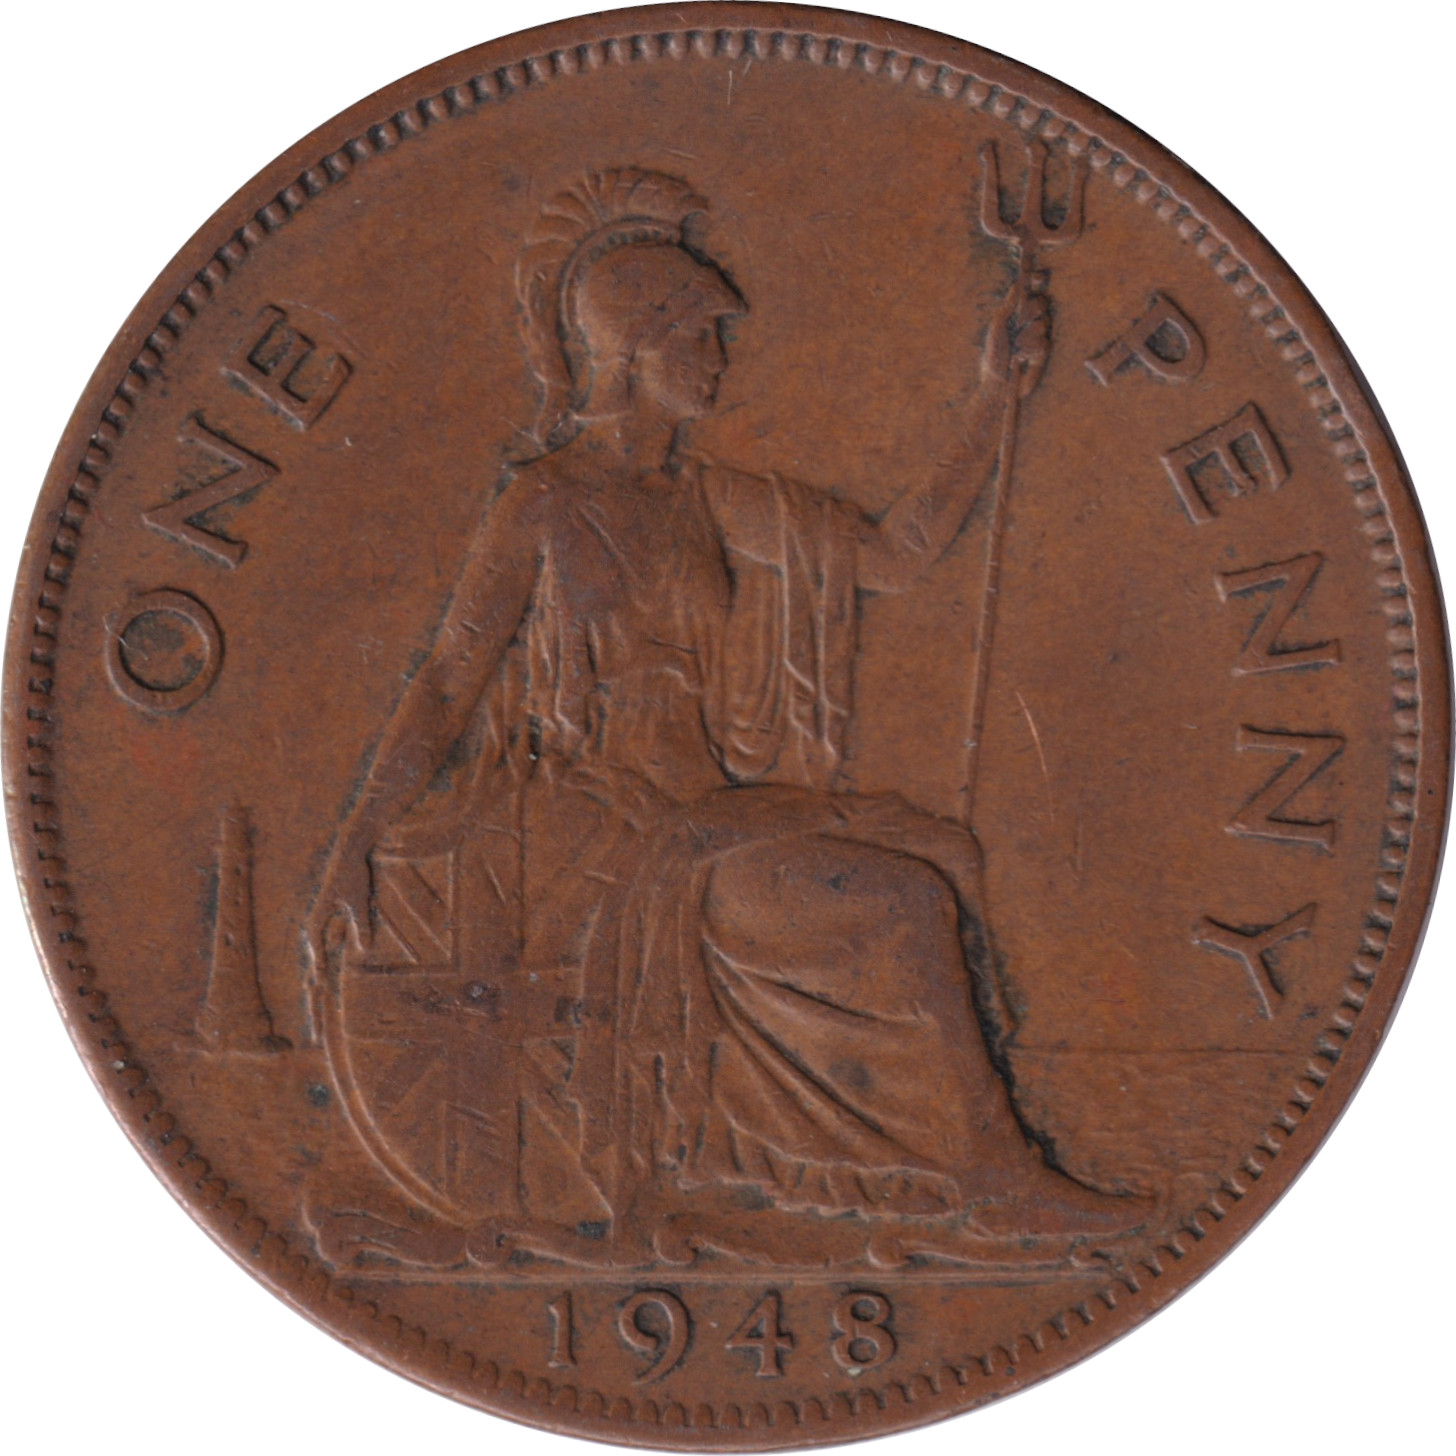 1 penny - Georges VI